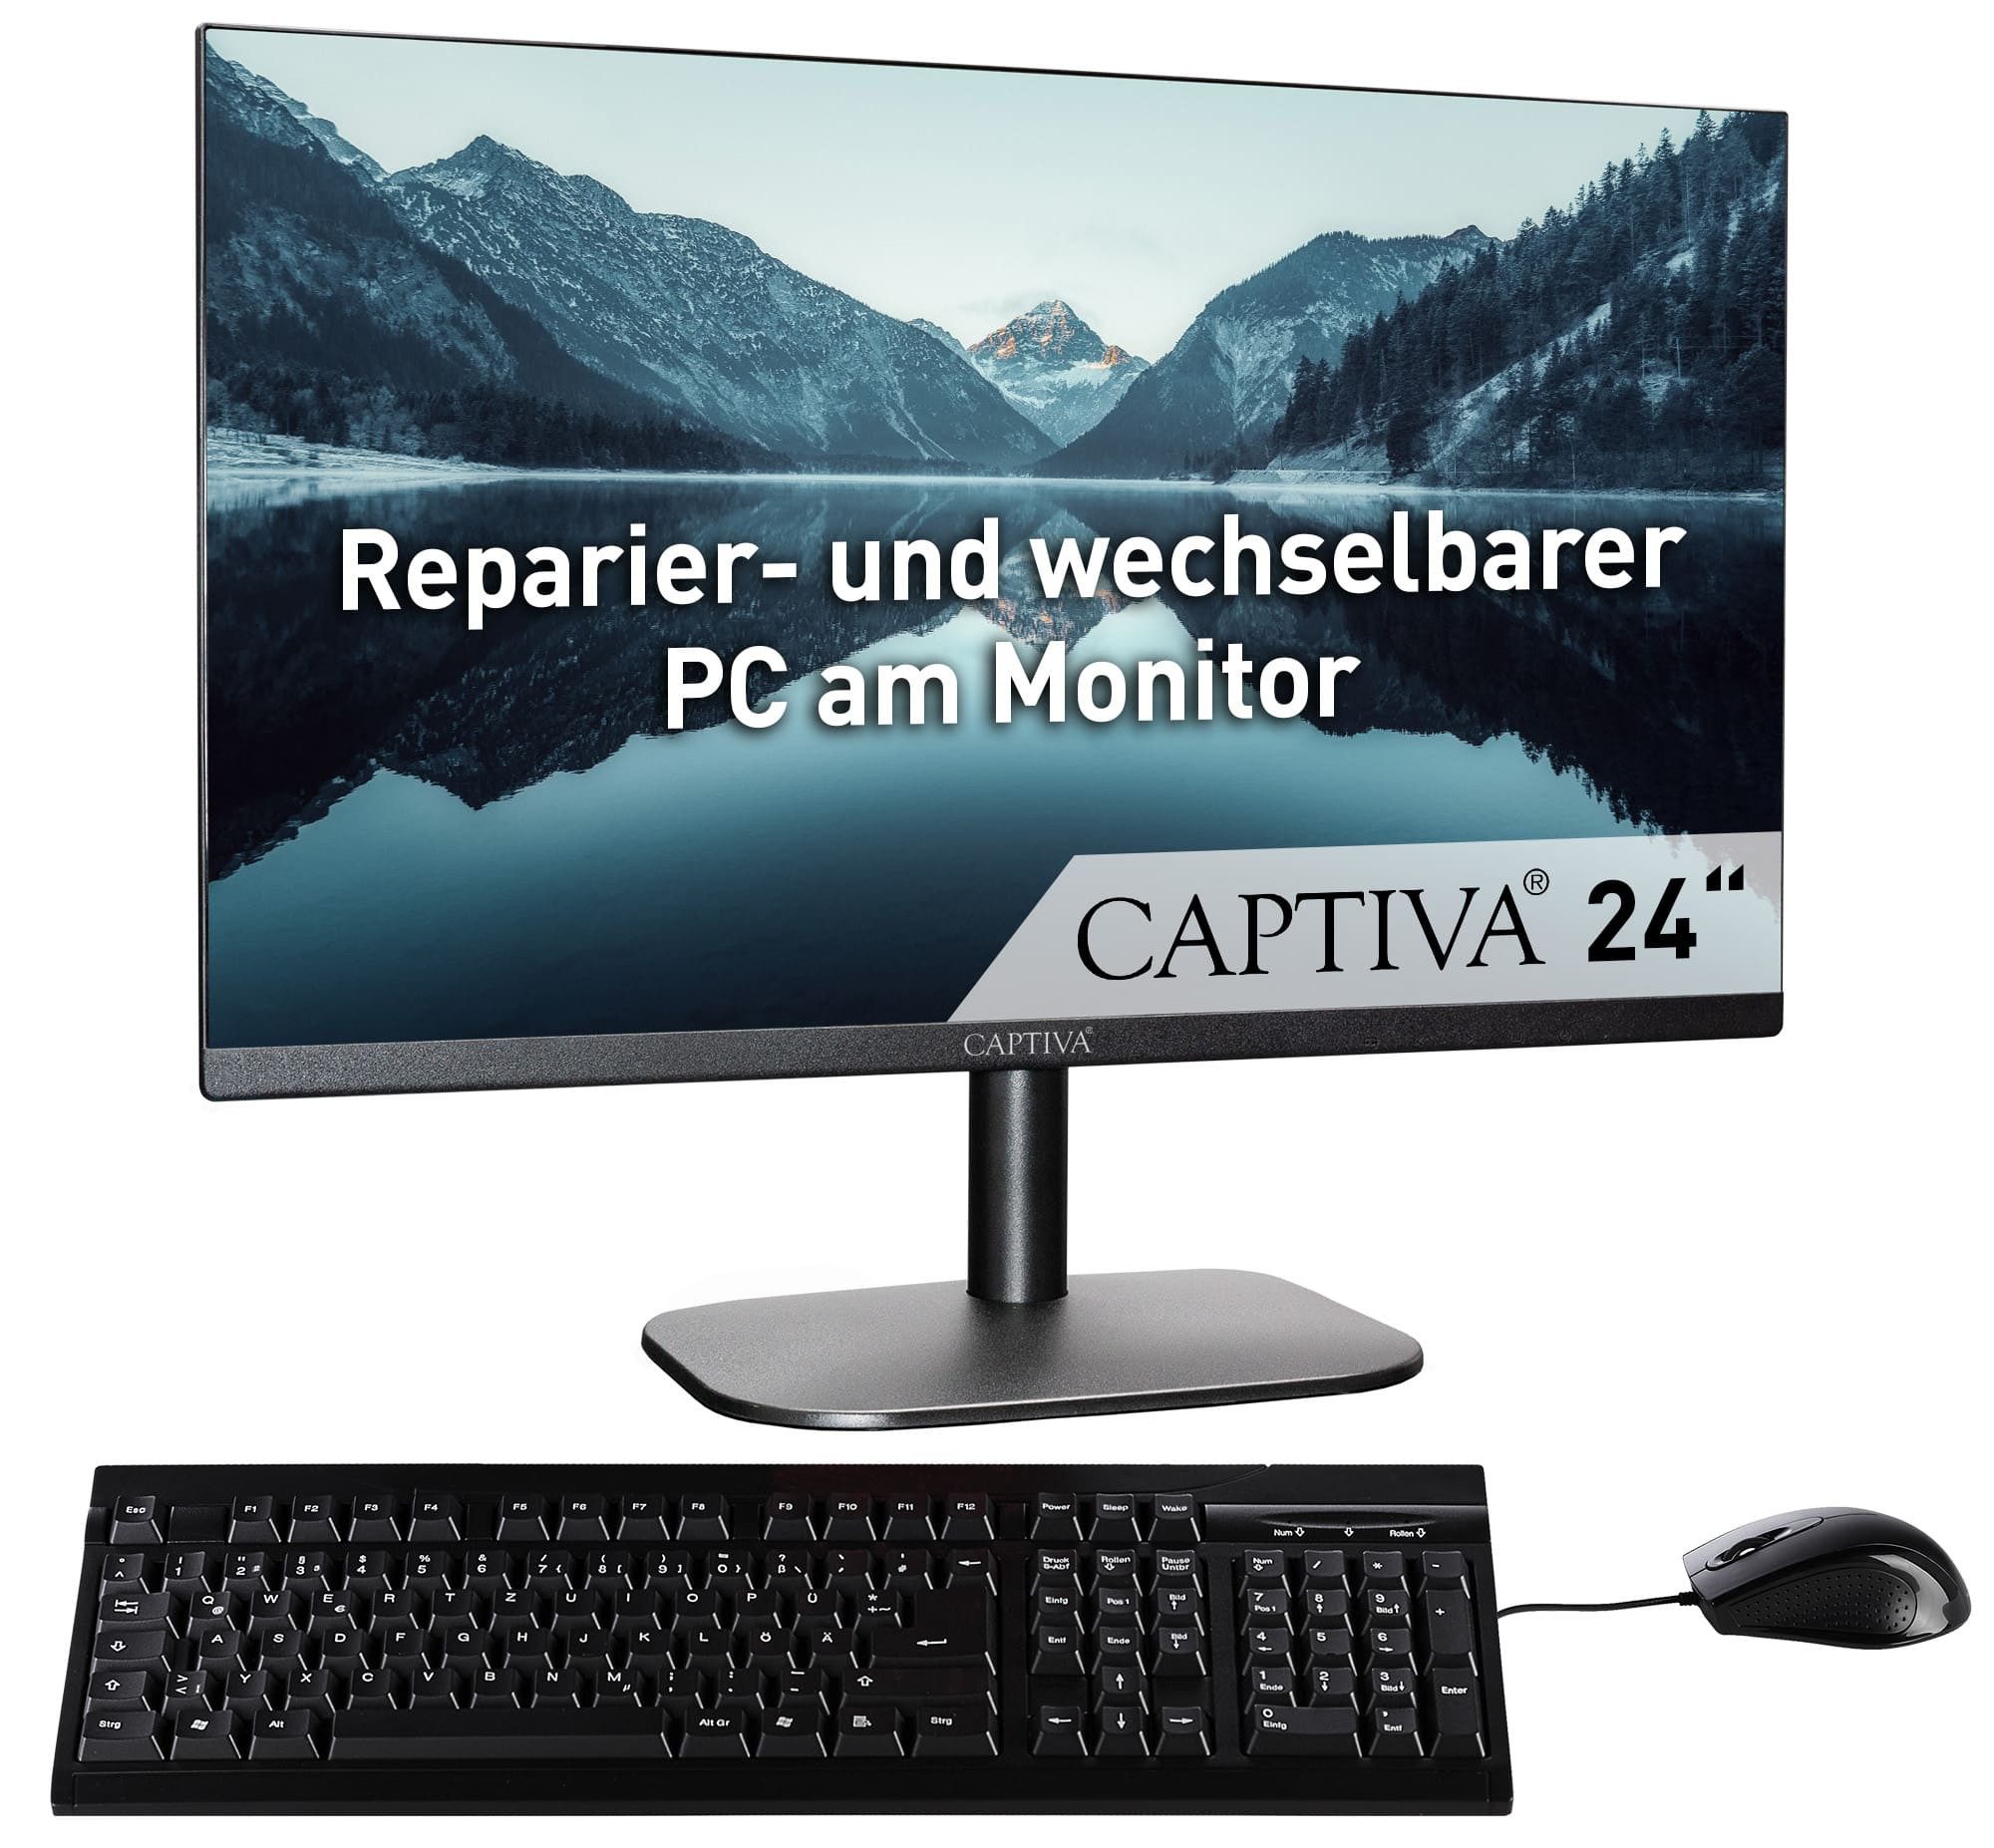 CAPTIVA All-In-One Power Starter I82-200 All-in-One PC (23,80 Zoll, Intel® Core i5 1240P, -, 8 GB RAM, 500 GB SSD, Luftkühlung)